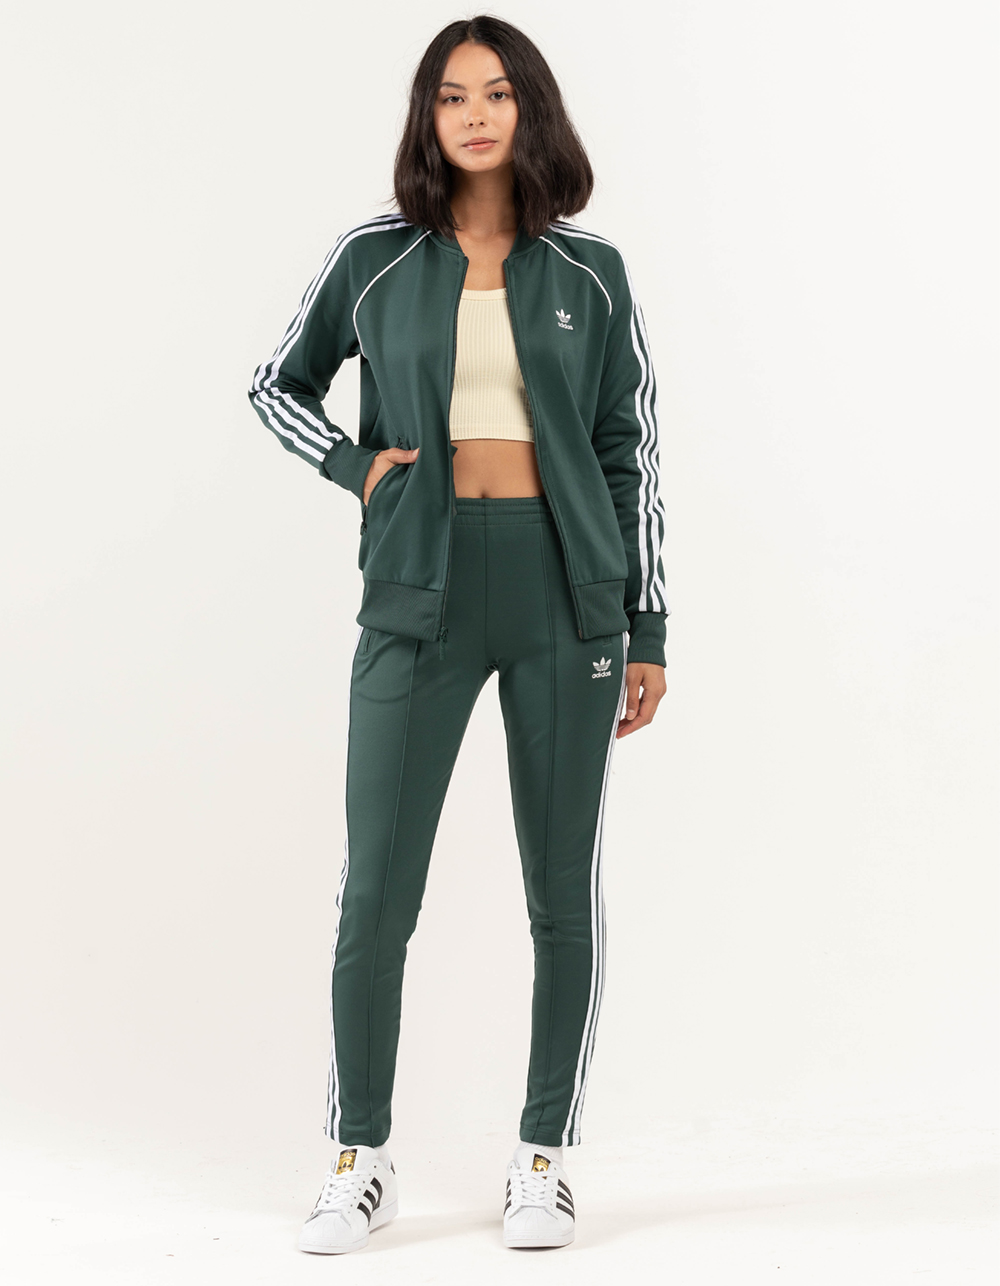 ADIDAS Primeblue SST Womens Track Pants - FOREST